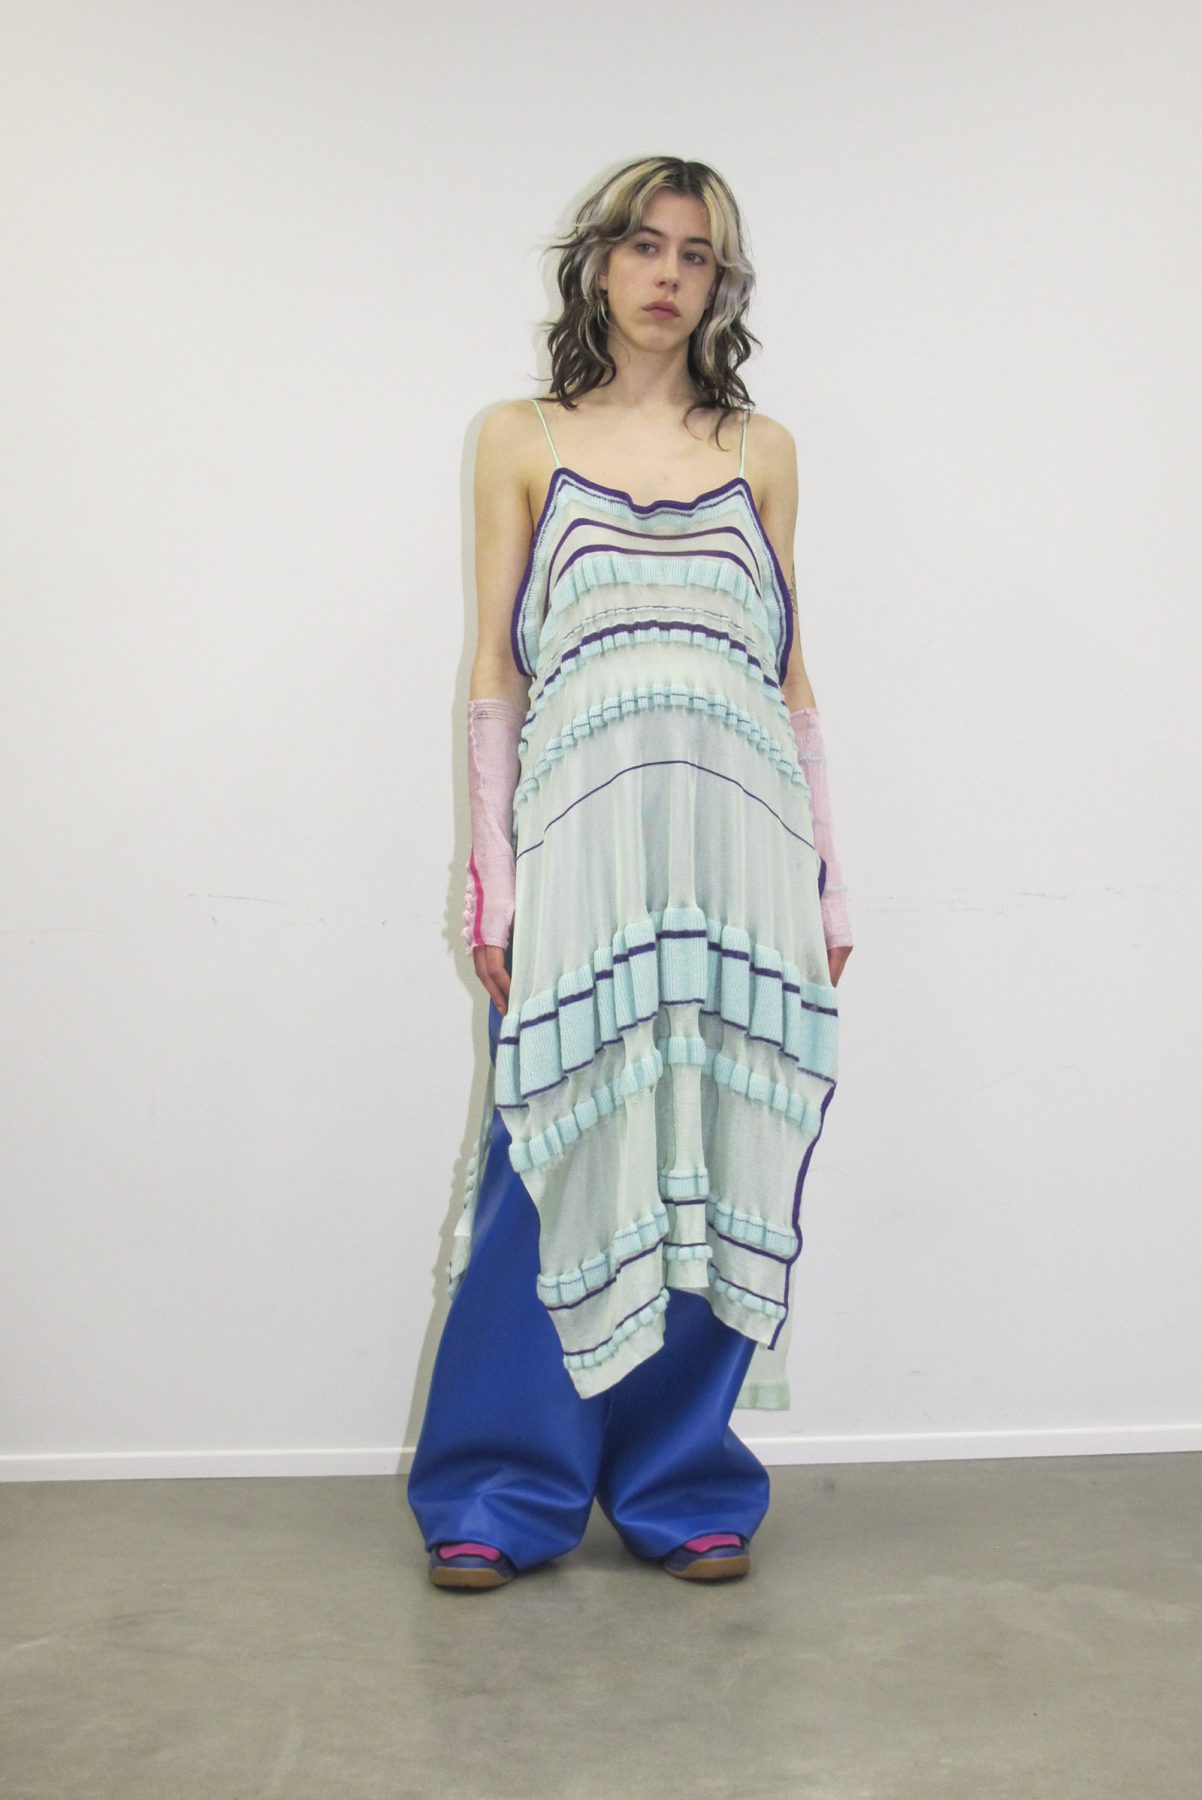 Photo of model wearing knitted striped mint dress and long ultramarine trousers